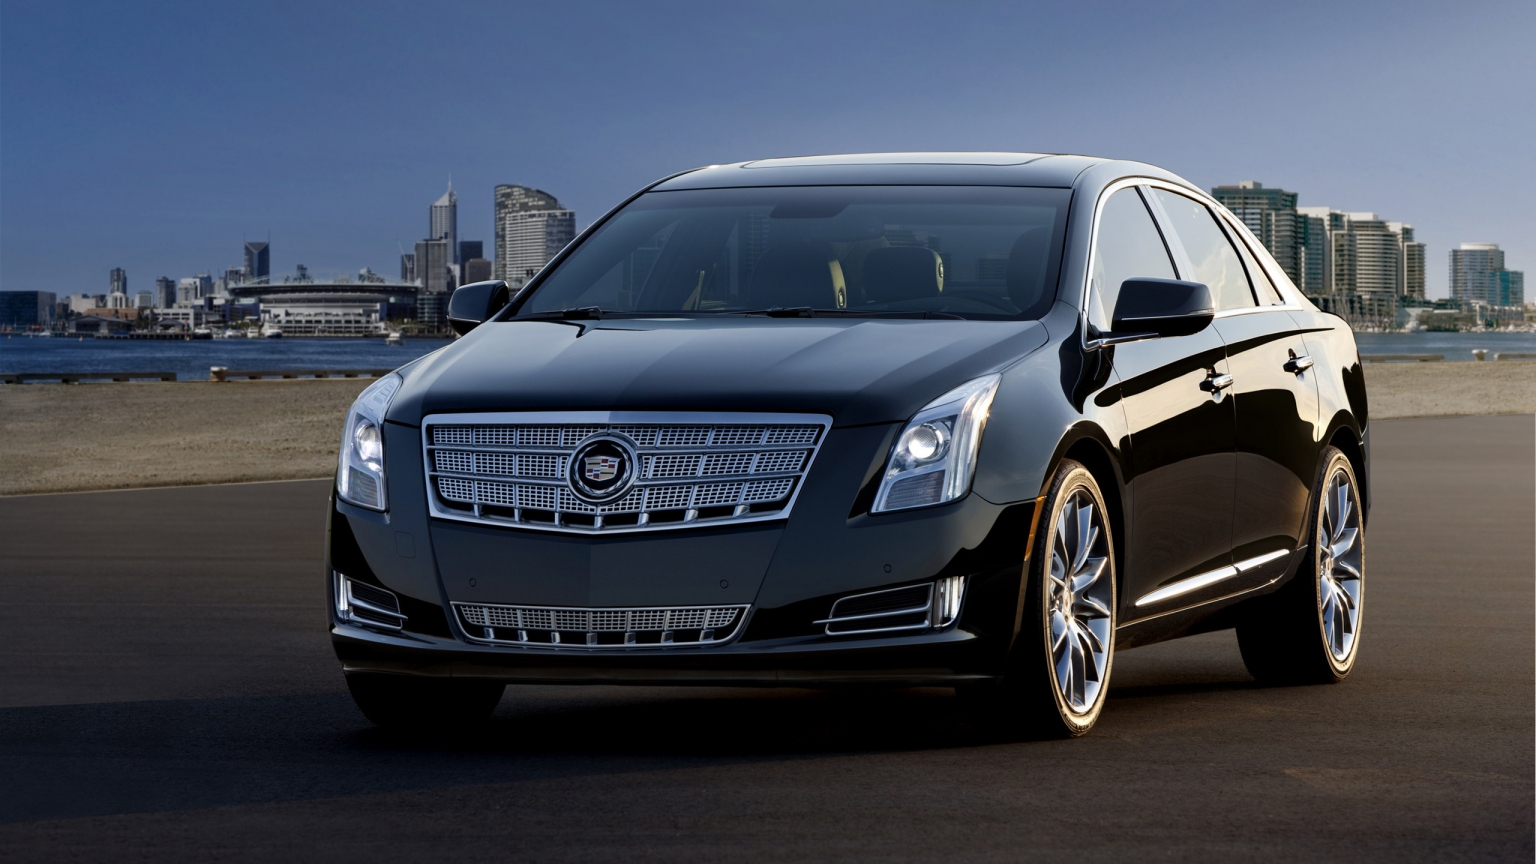 2013 Cadillac XTS for 1536 x 864 HDTV resolution